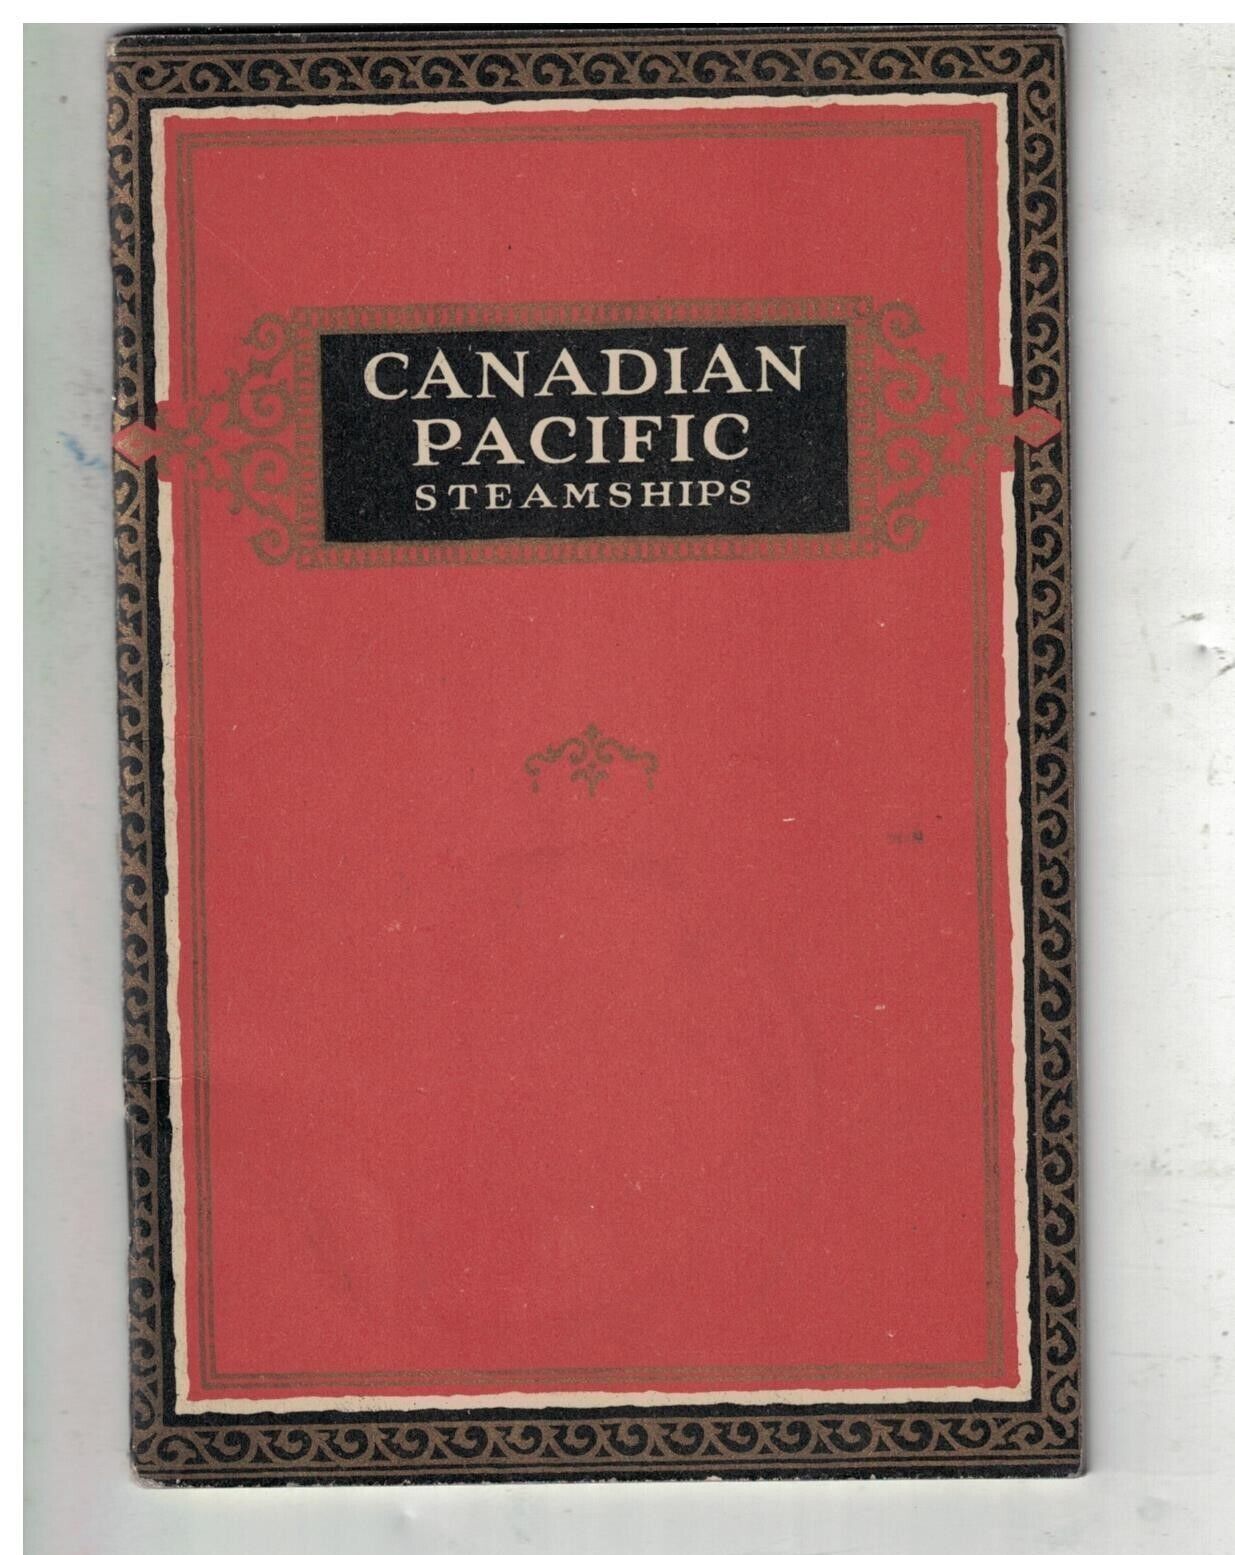 1928 Canadian Pacific Steamships Booklet Quebec to Cherbourg